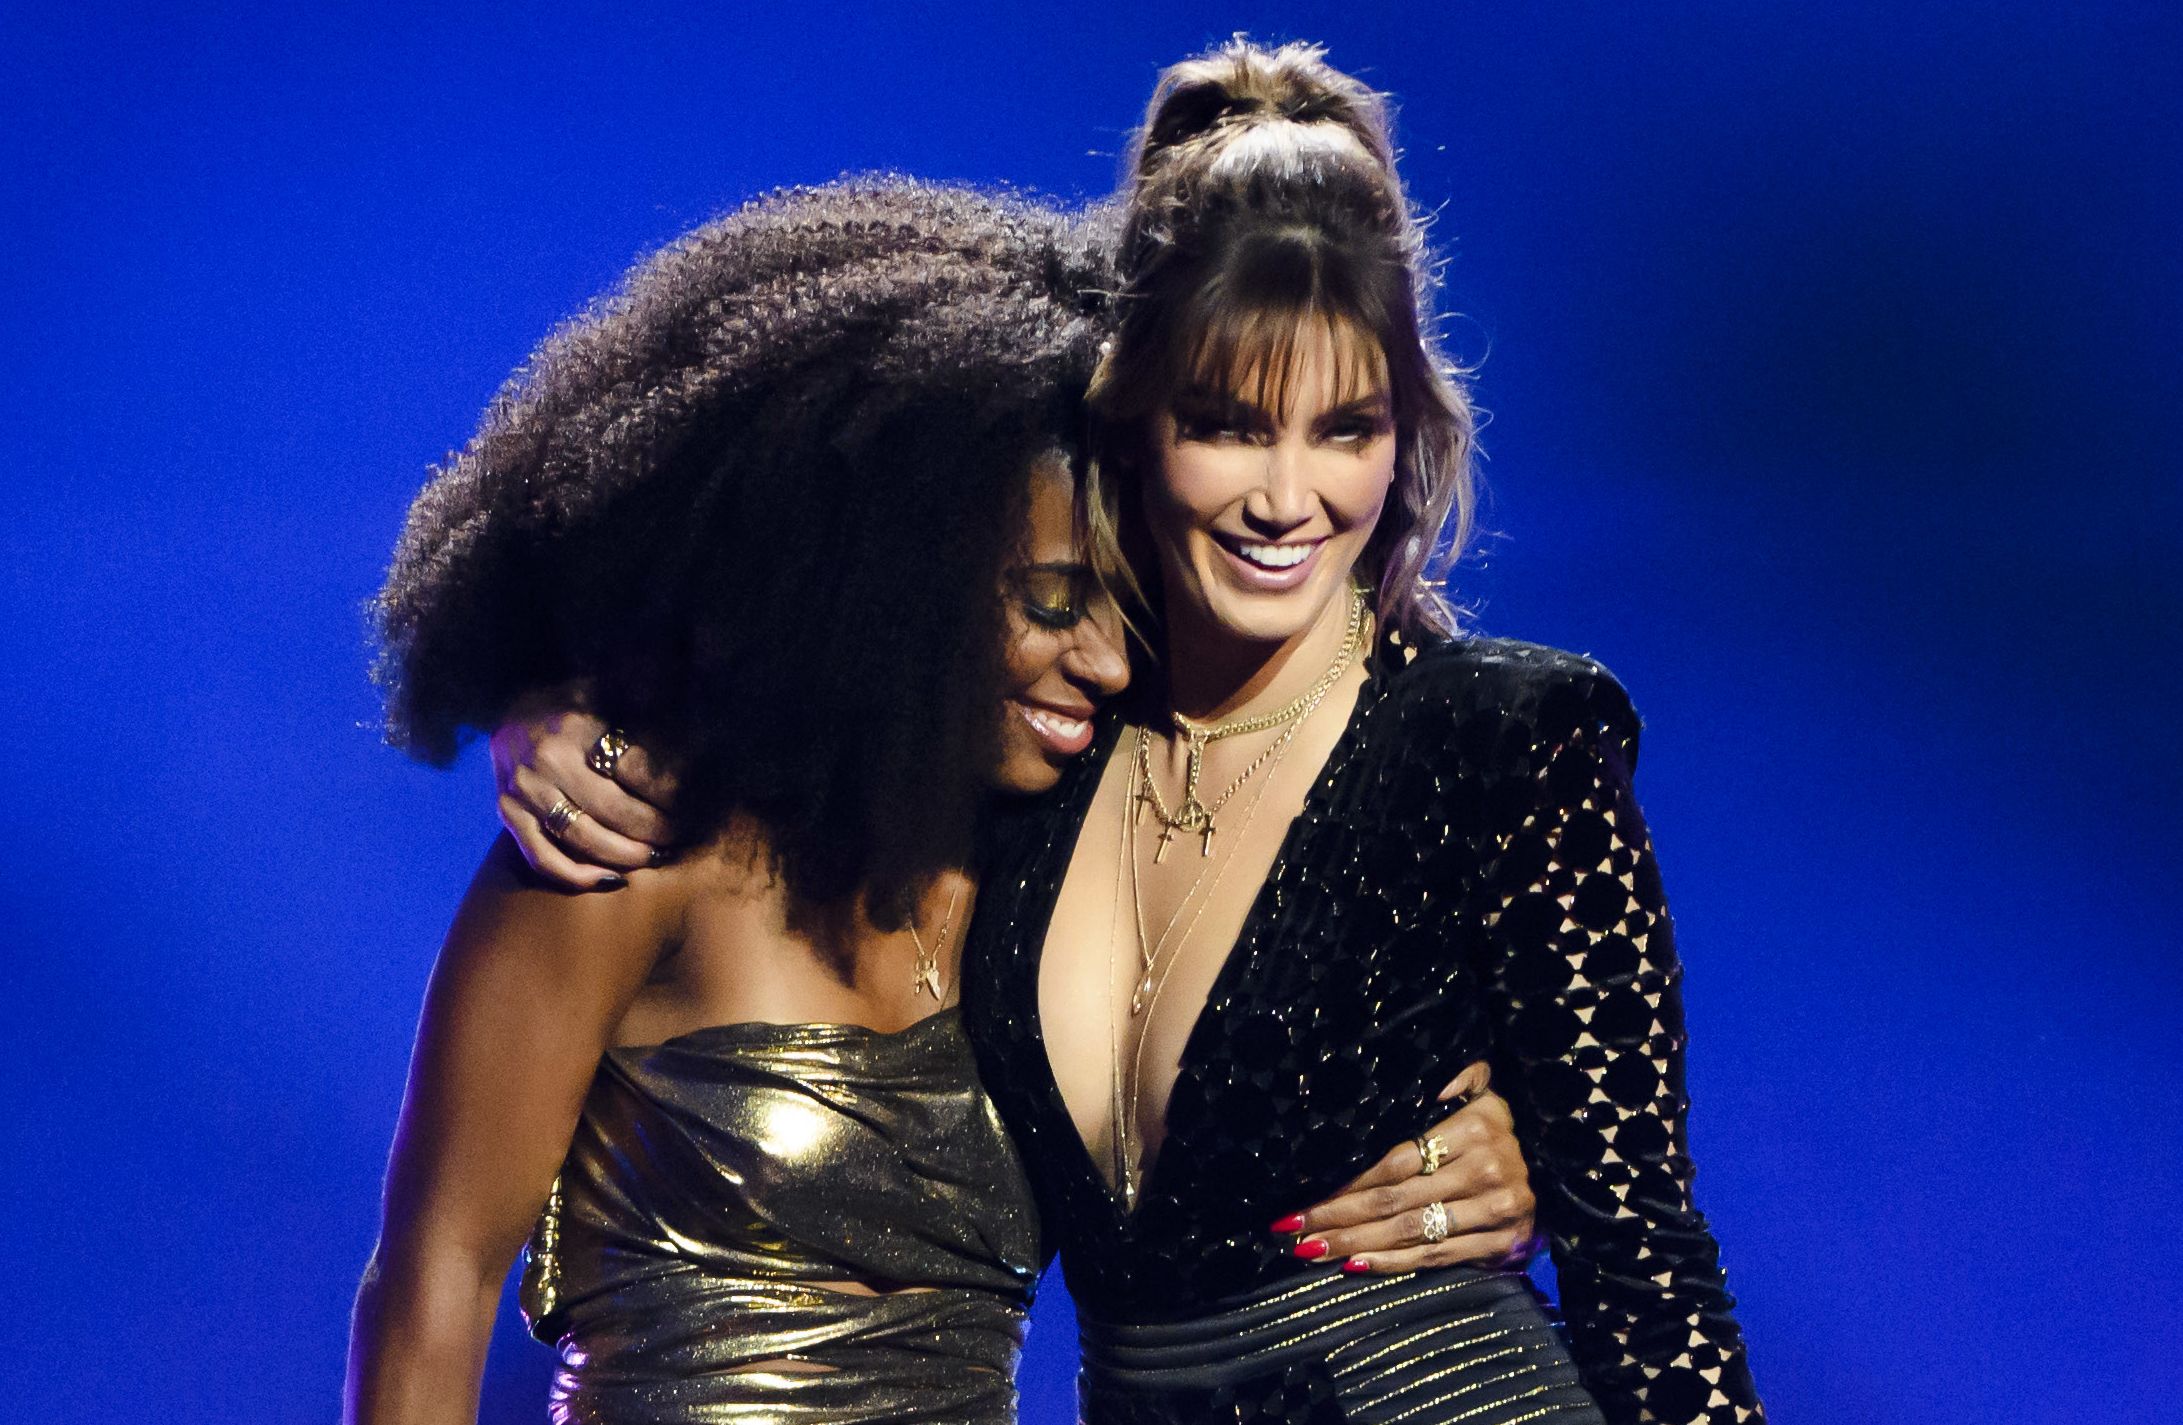 Close bond: Kelly Rowland and Delta Goodrem have become firm friends during the time together on The Voice. Photo: Supplied